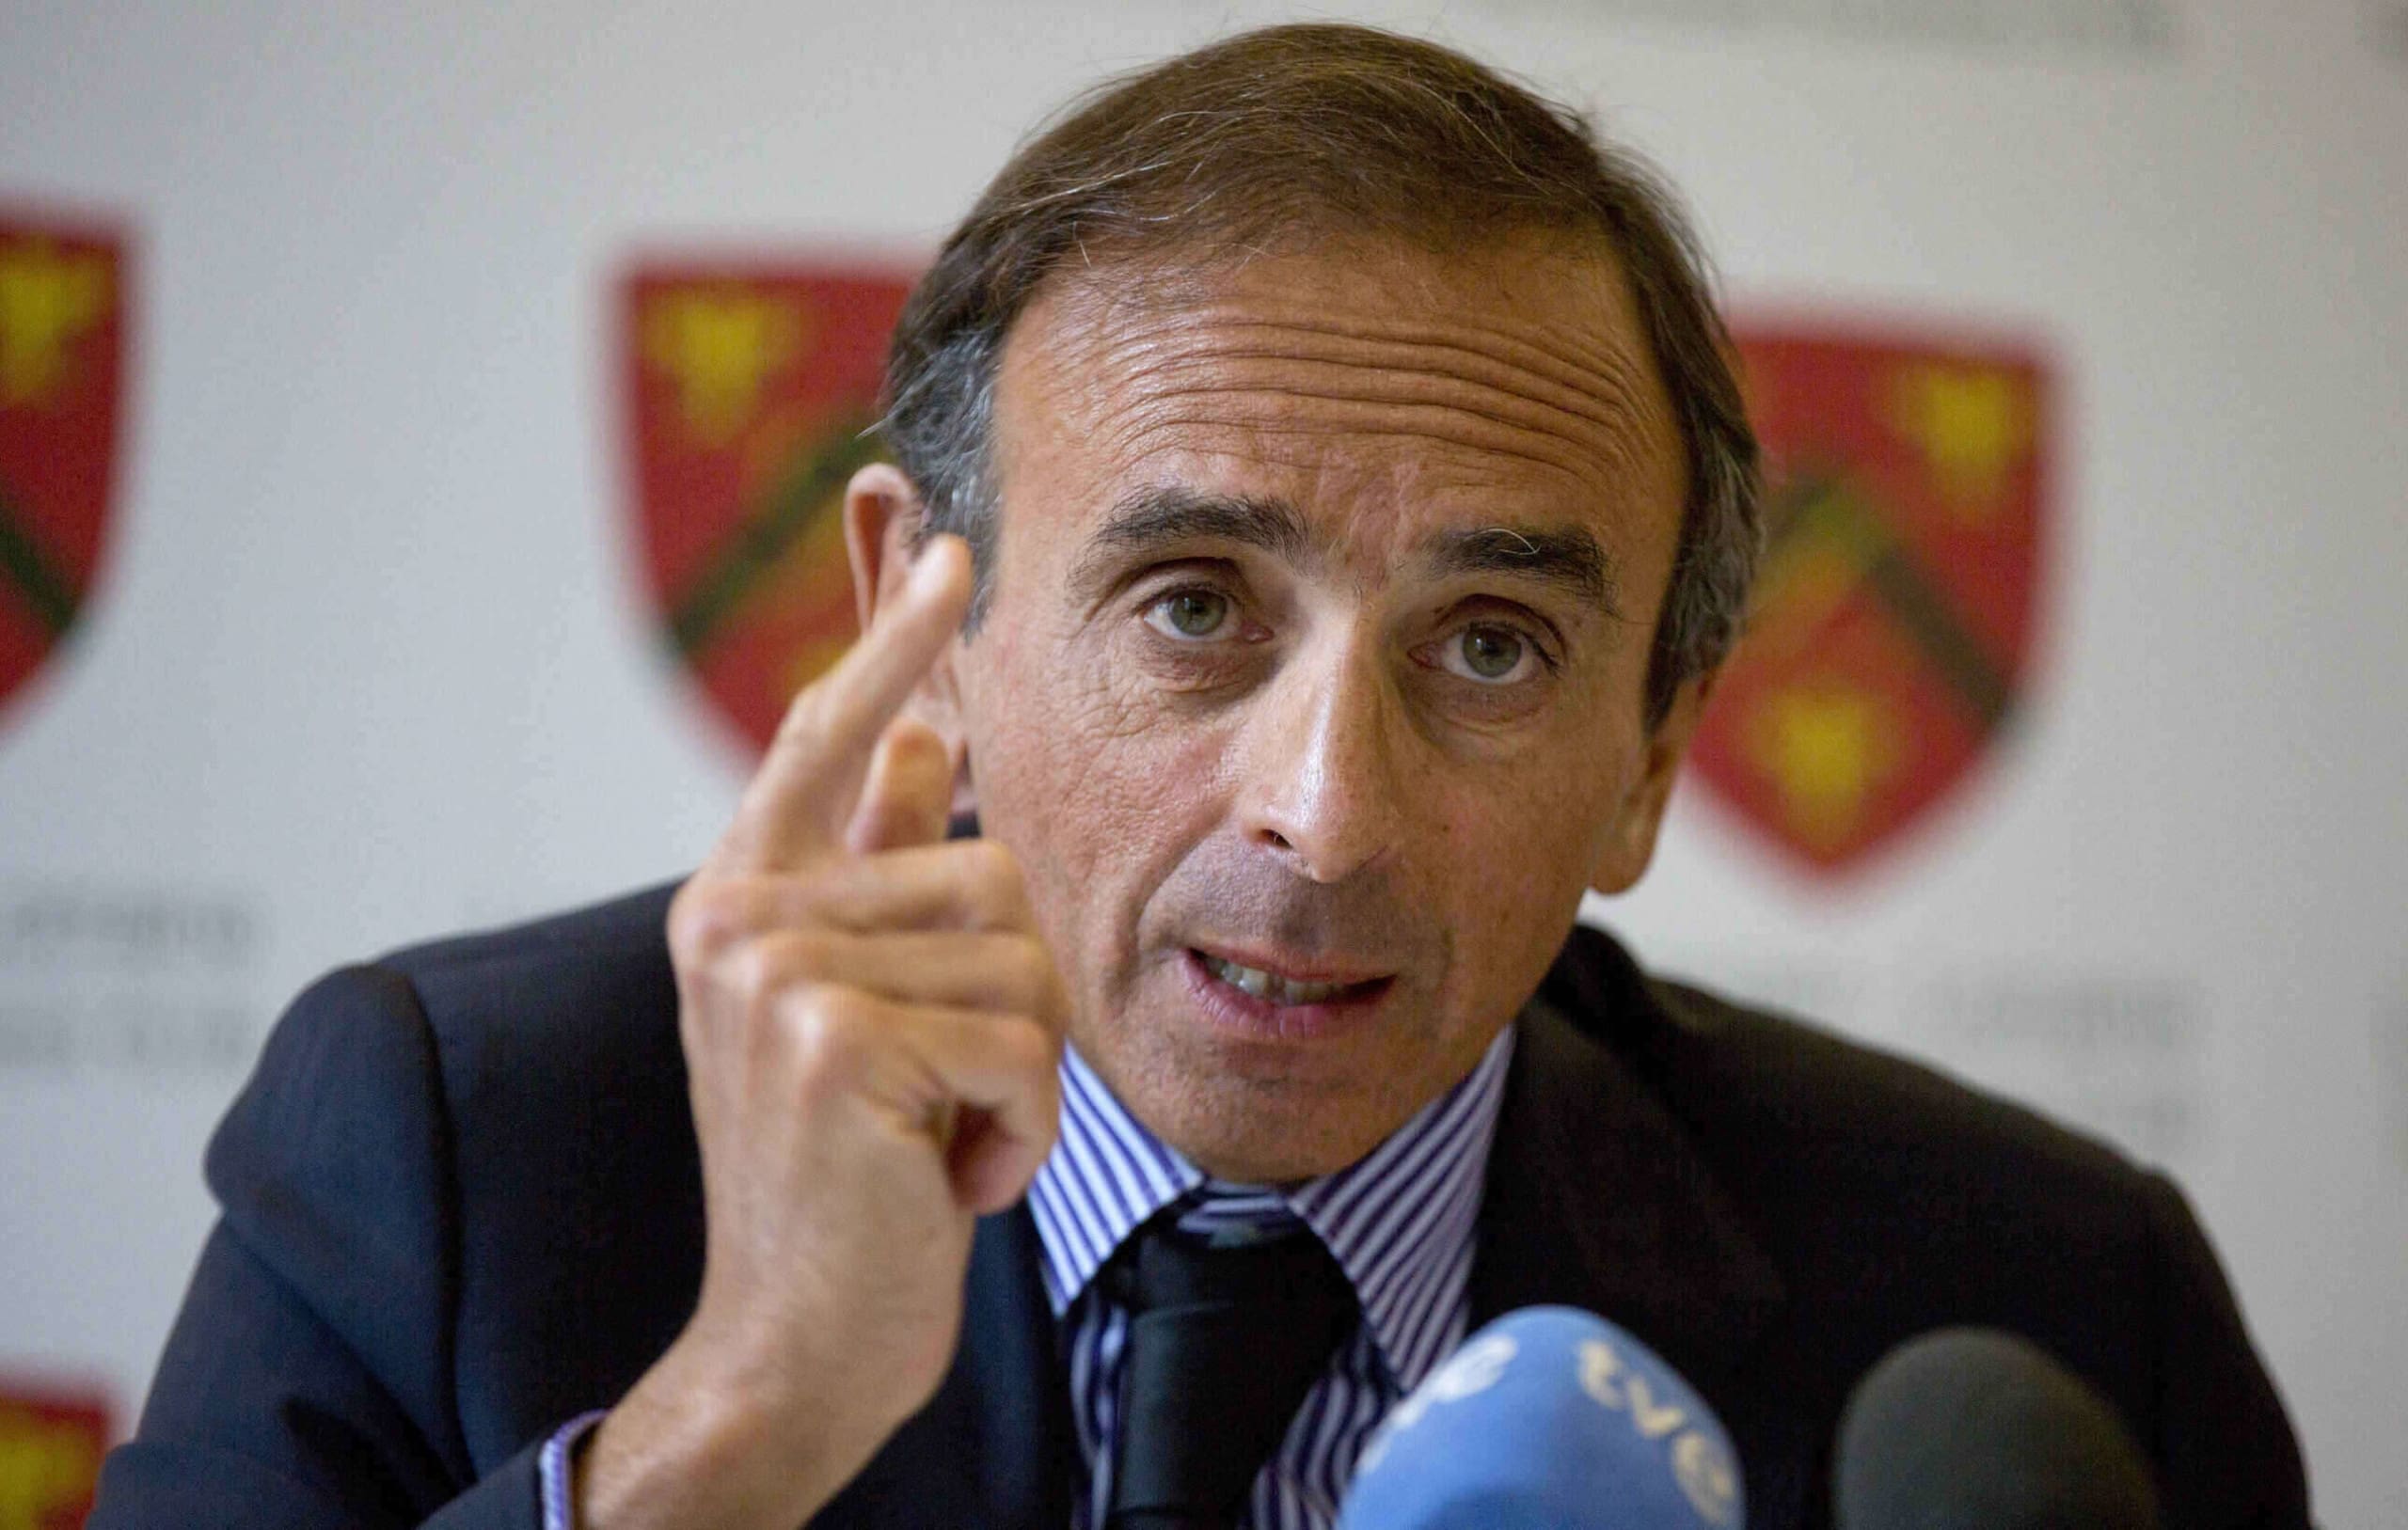 Éric Zemmour, foreign names